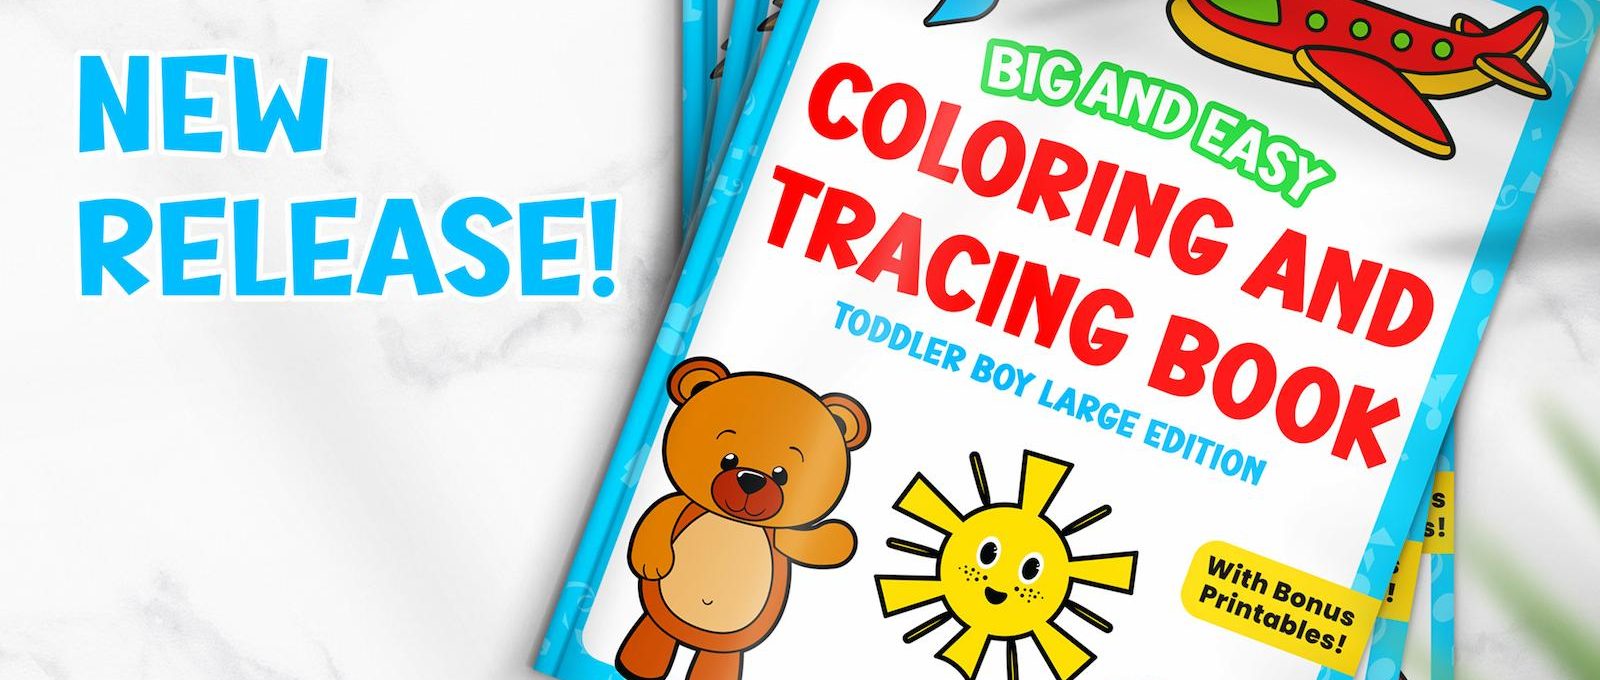 Big and Easy Toddler Coloring and Tracing Book